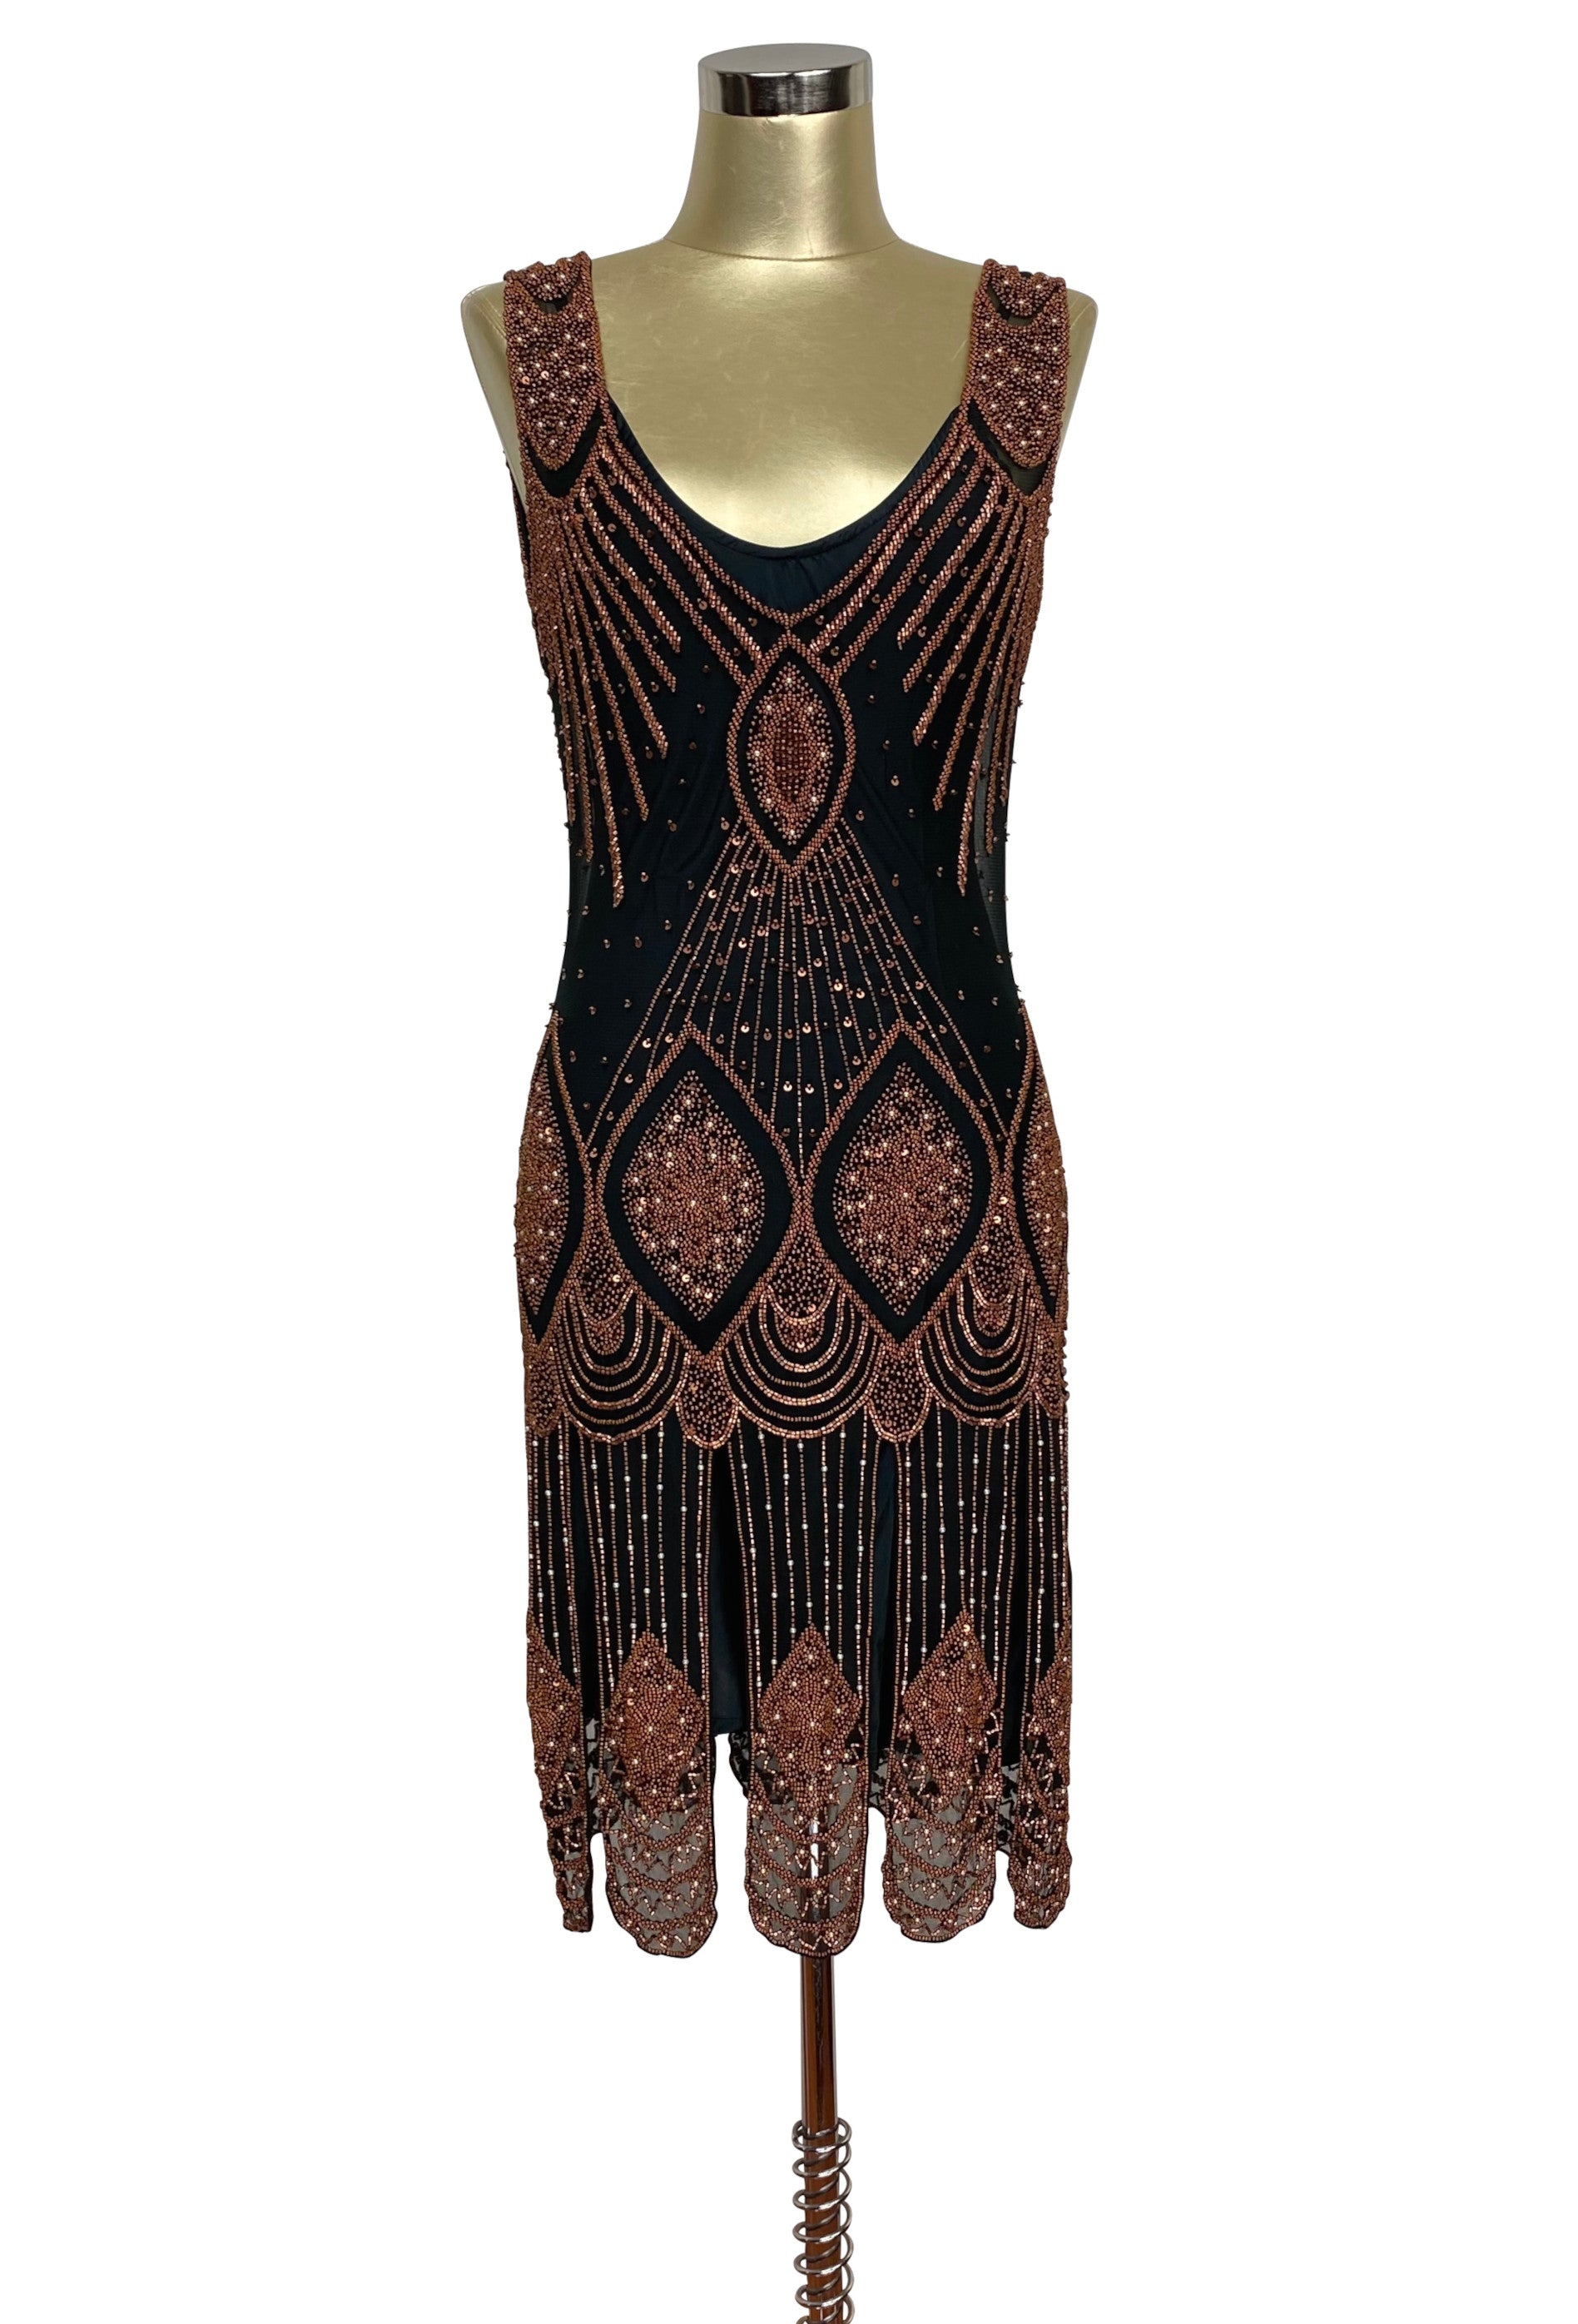 1920's Flapper Carwash Hem Beaded Party Dress - The Starlet - Copper o